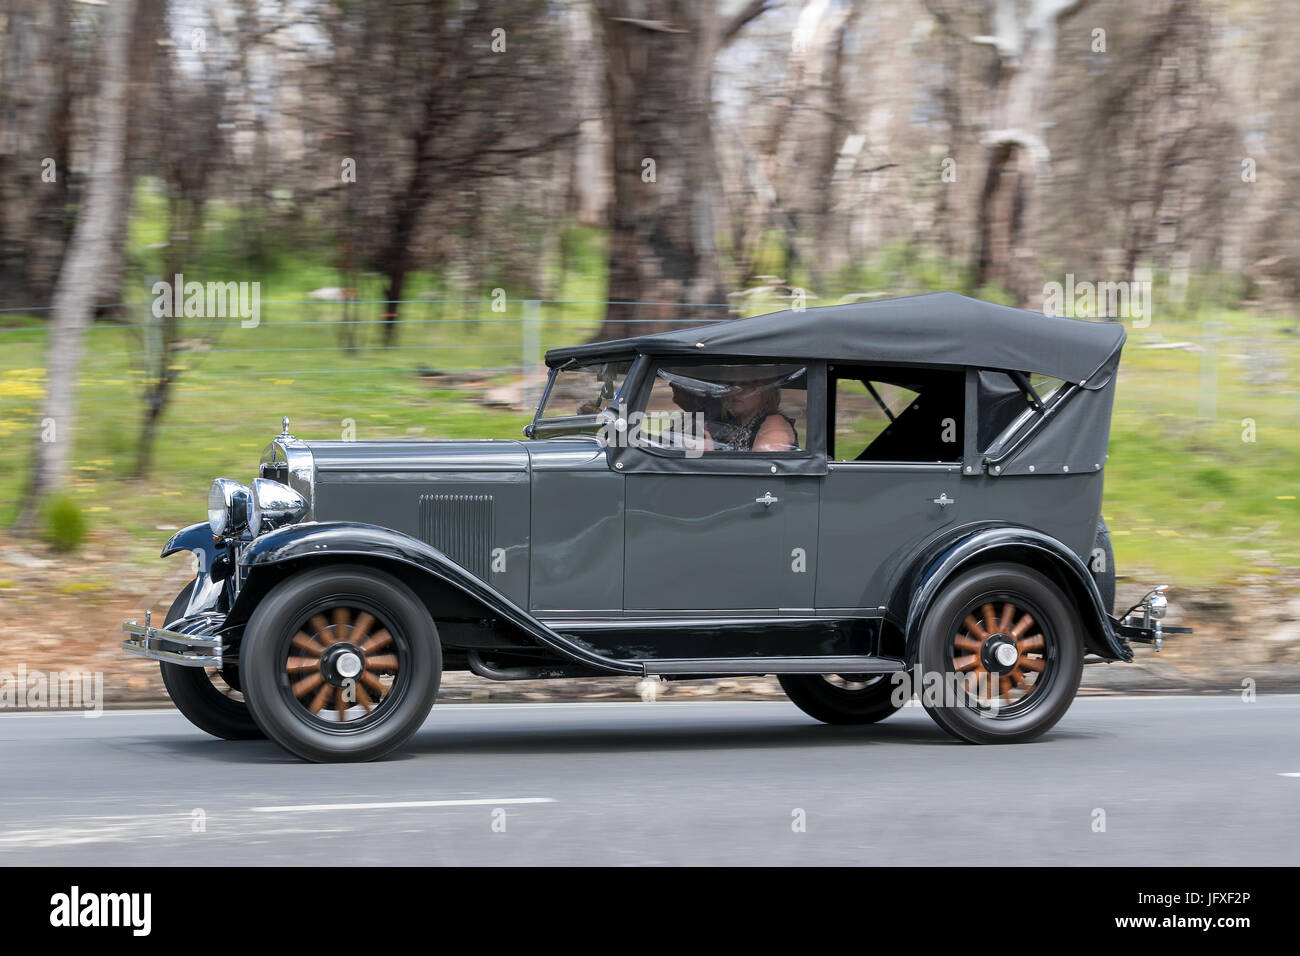 Vintage 1930 Chevrolet Tourer driving on country roads near the town of Birdwood, South Australia. Stock Photo